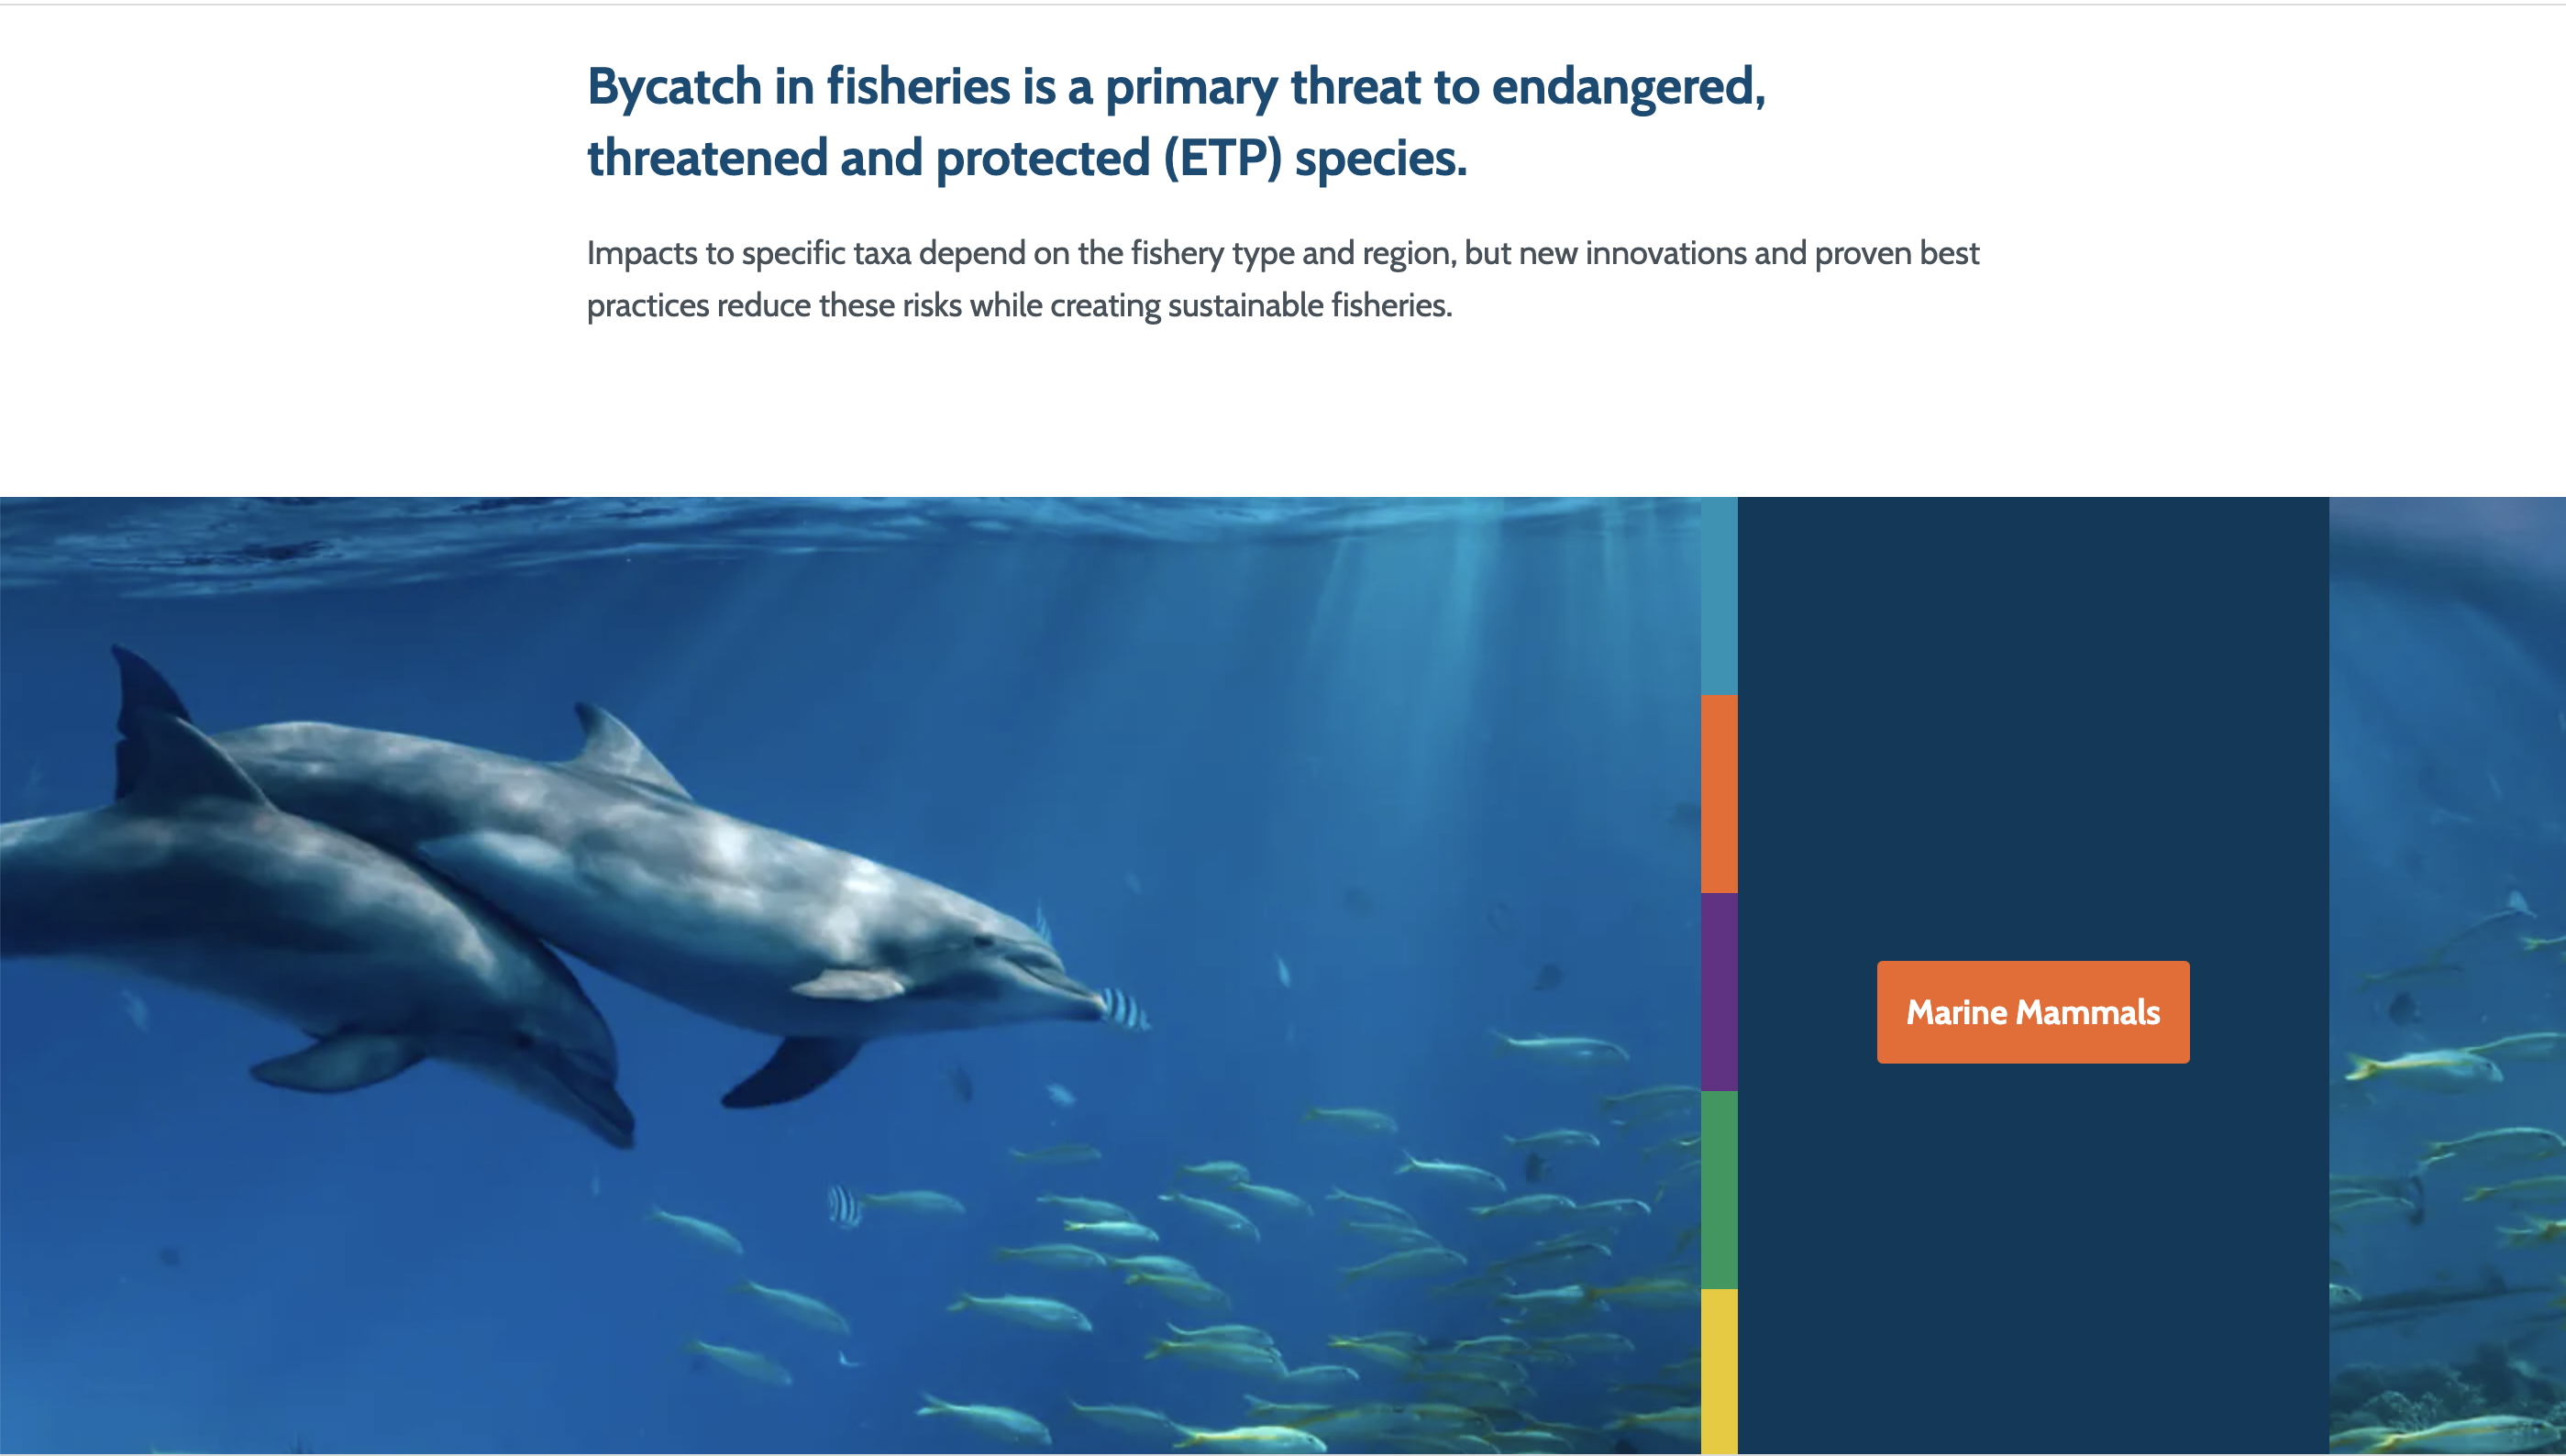 Dolphins, a bycatch species, swimming near a school of small fish